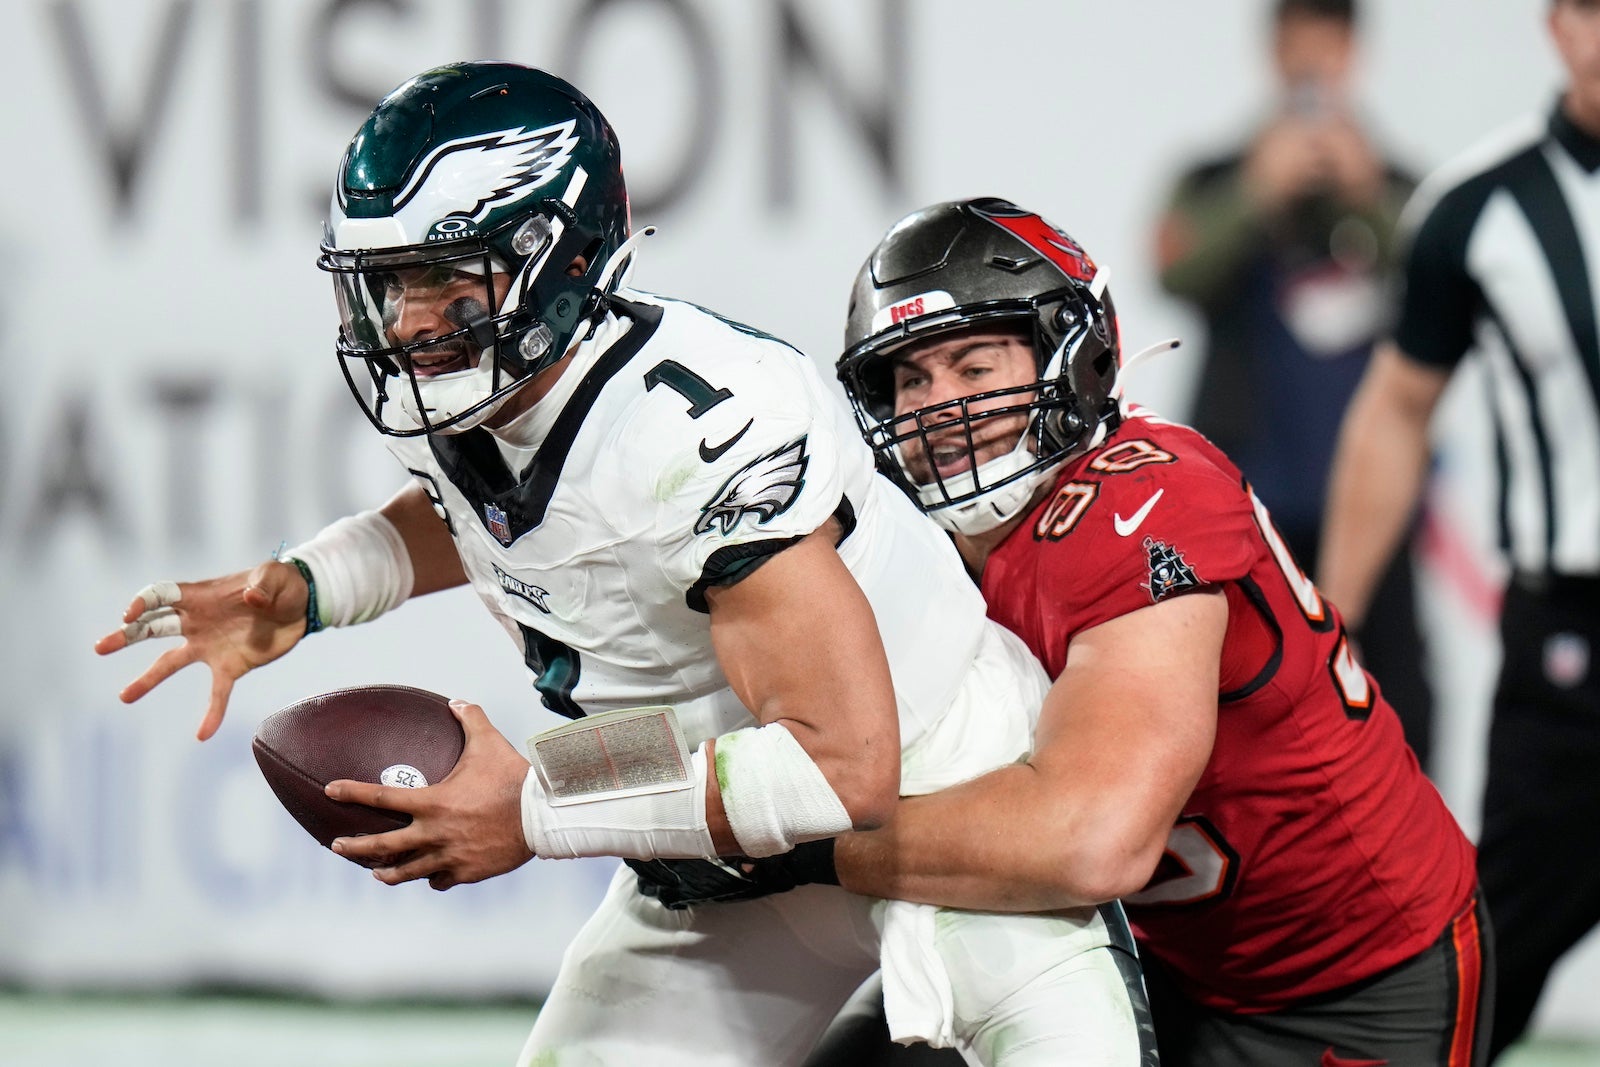 NFC wild card: Eagles lose to Buccaneers 32-9, eliminated from